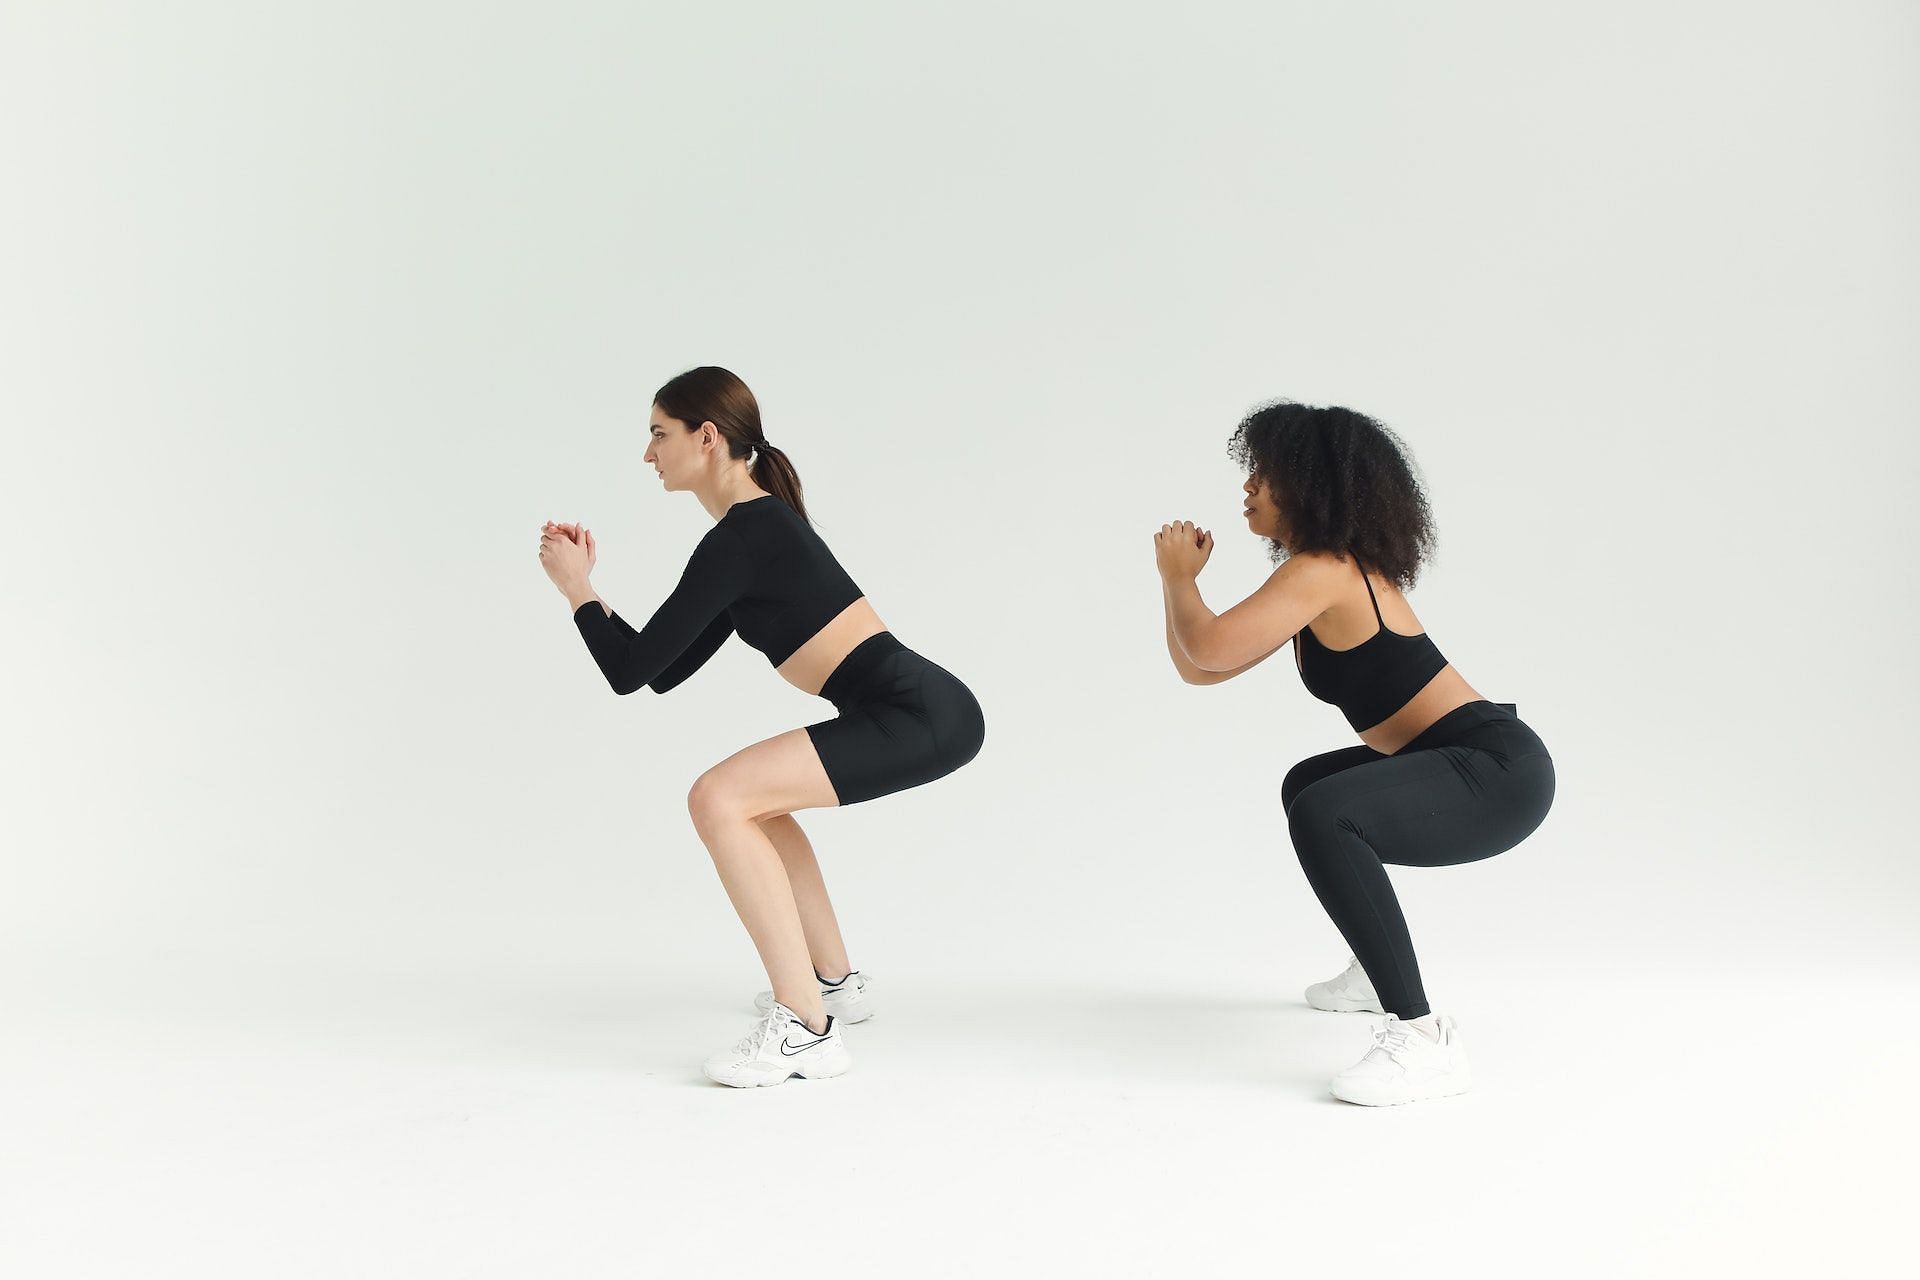 The Bulgarian squats target the same muscles as the traditional squats. (Photo via Pexels/Polina Tankilevitch)